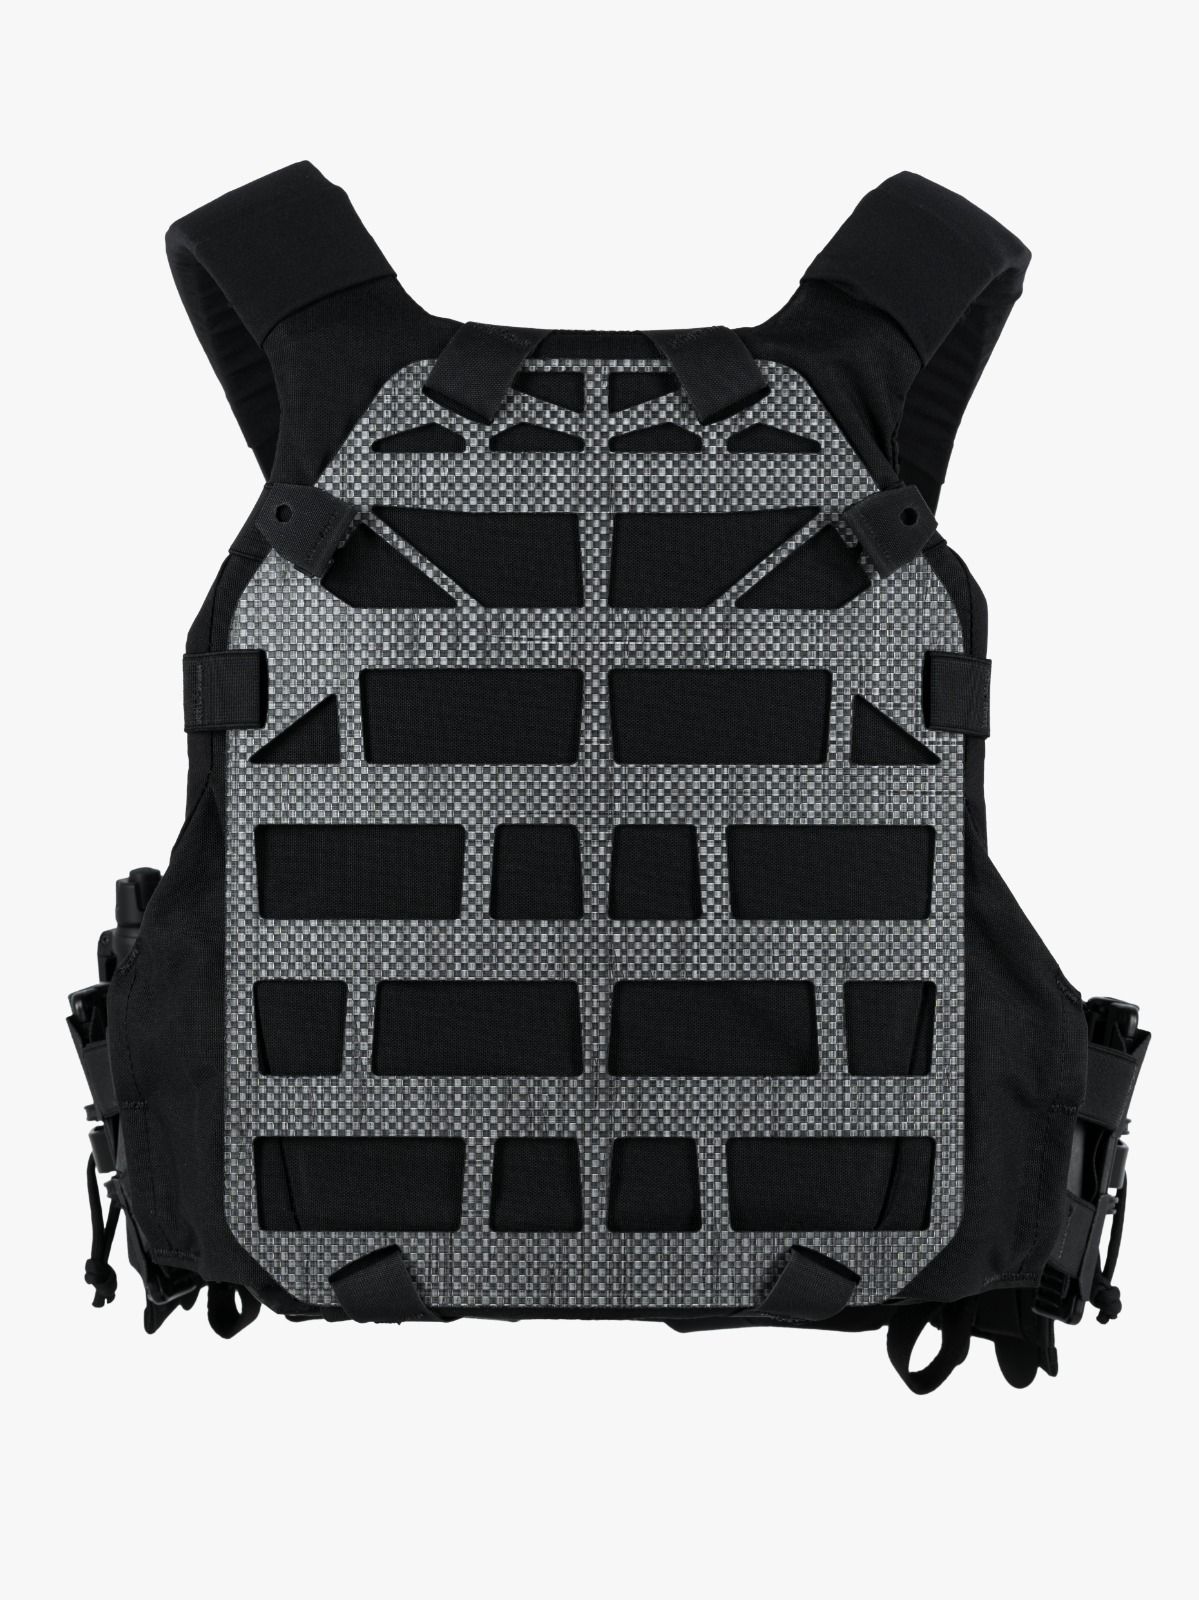 4-14 Adaptive Plate Carrier +  Cages - Ranger Green